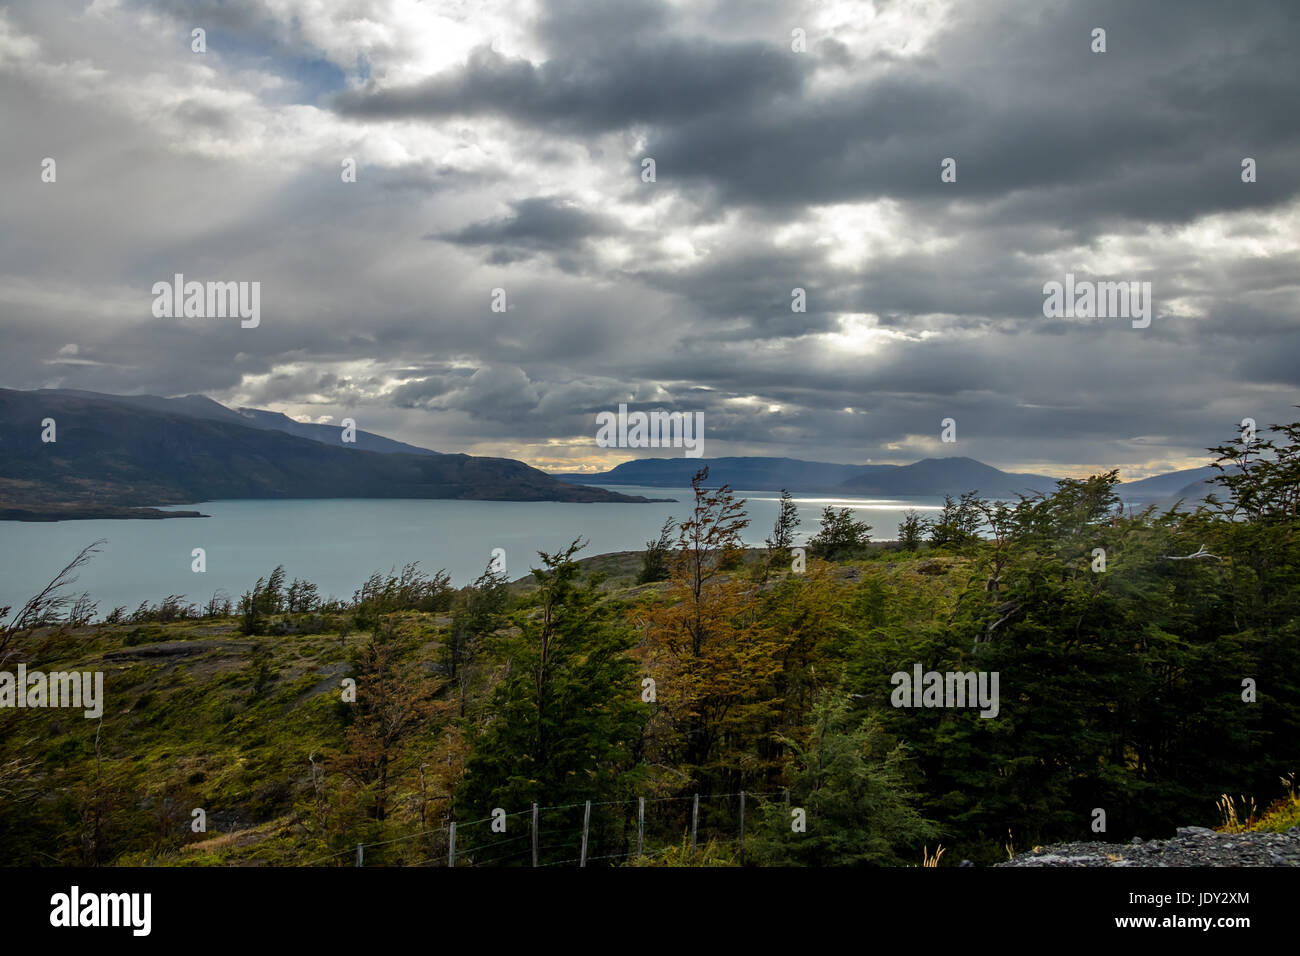 Lake at Torres del Paine National Park - Patagonia, Chile Stock Photo